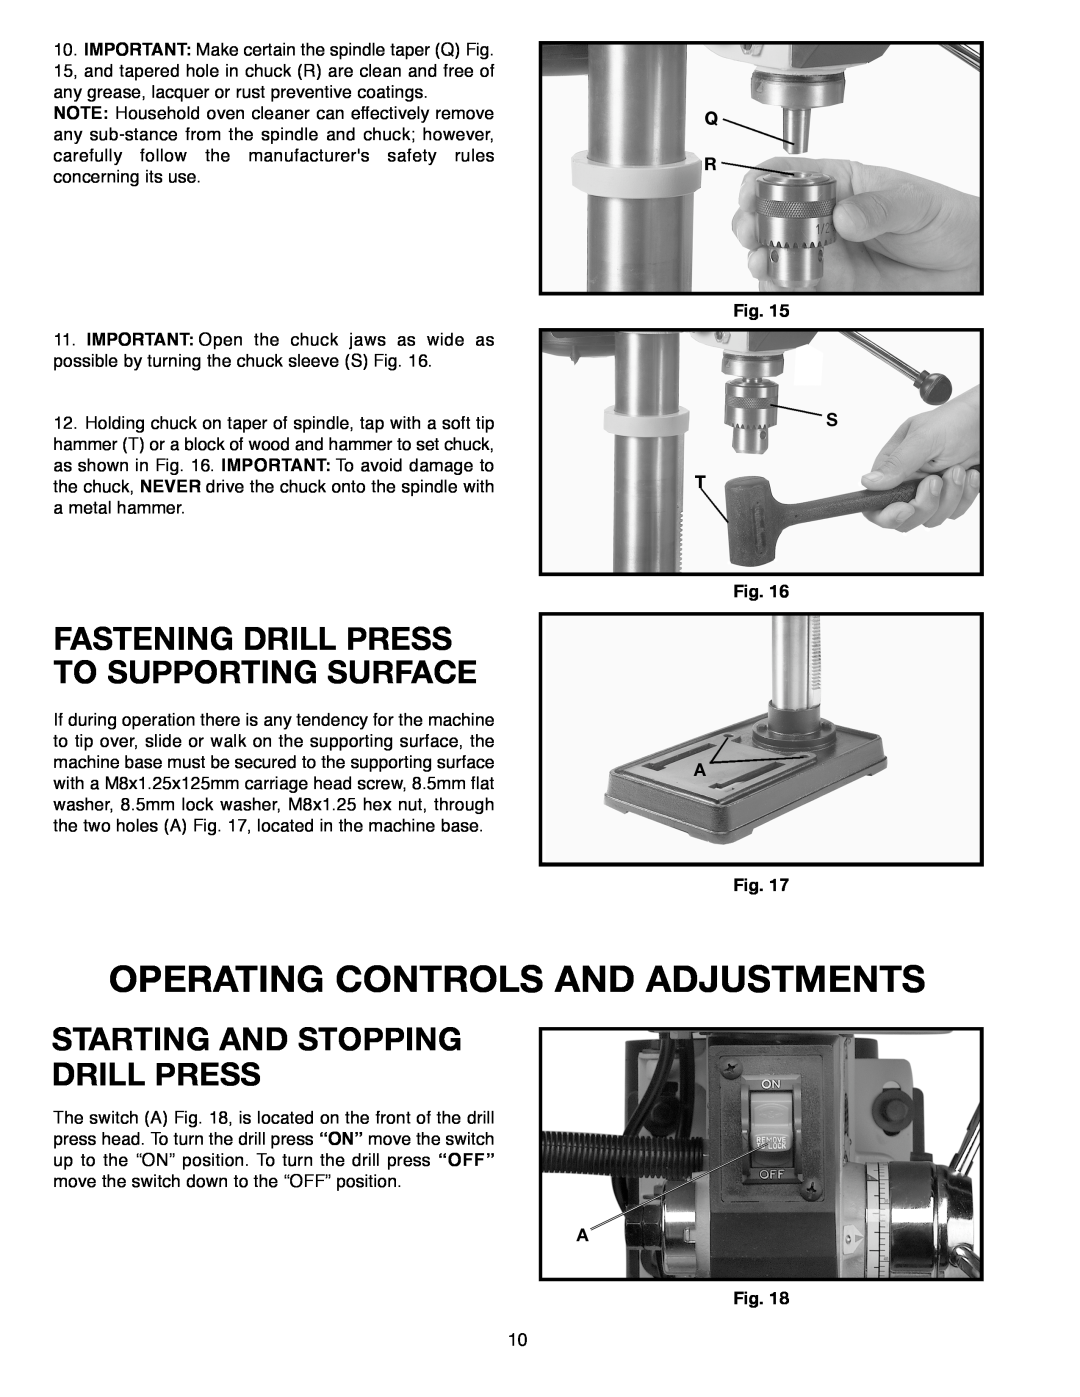 Delta SM300, 638517-00 warranty Operating Controls And Adjustments, Fastening Drill Press To Supporting Surface 